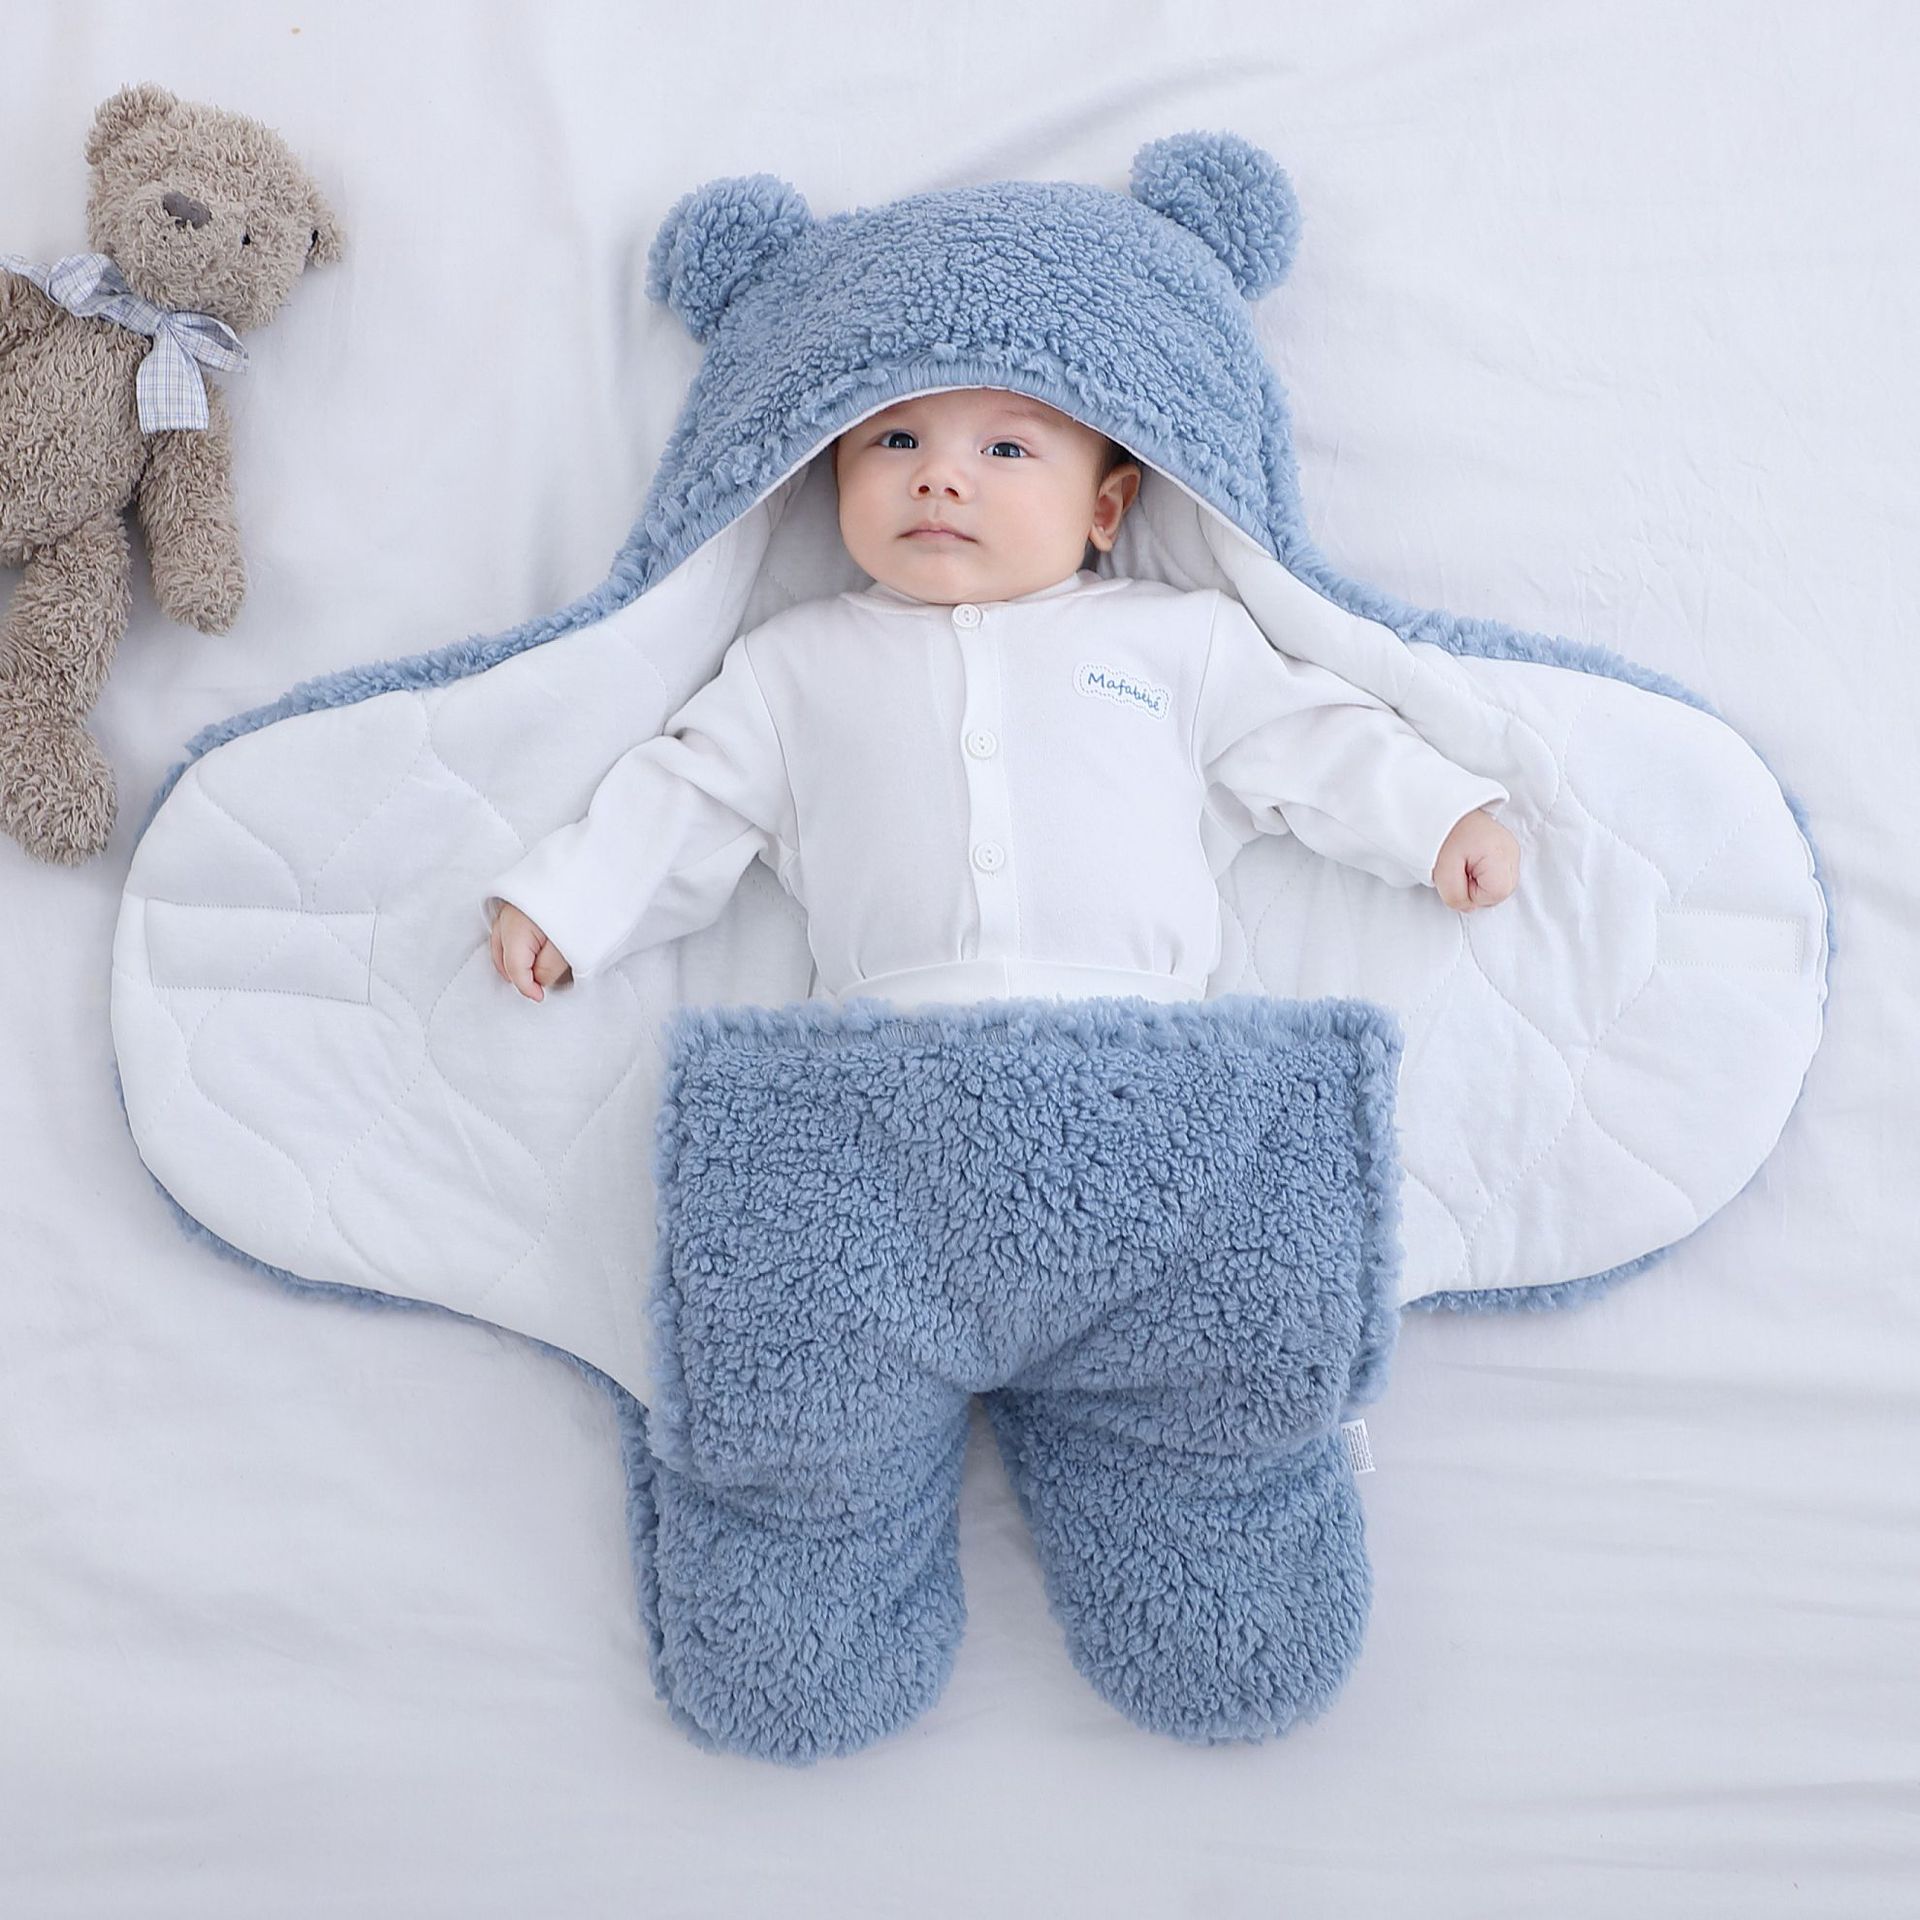 More About Usefulness of Baby Sleeping Bags